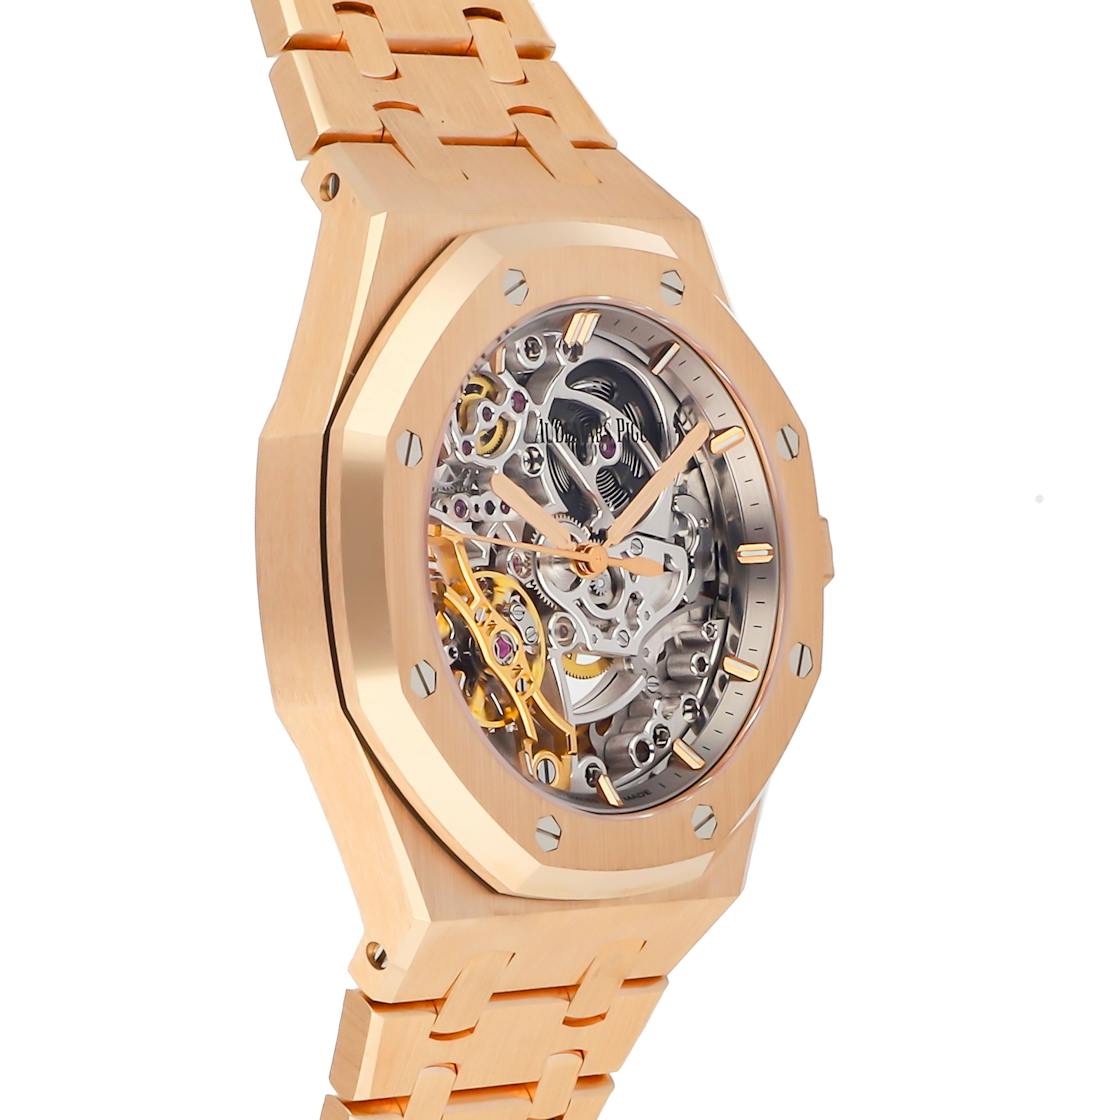 Audemars Piguet Royal Oak - 37mm Skeleton Rose Gold - Double Balance Wheel Openworked -Preowned (Ref#15467OR.OO.1256OR.01)